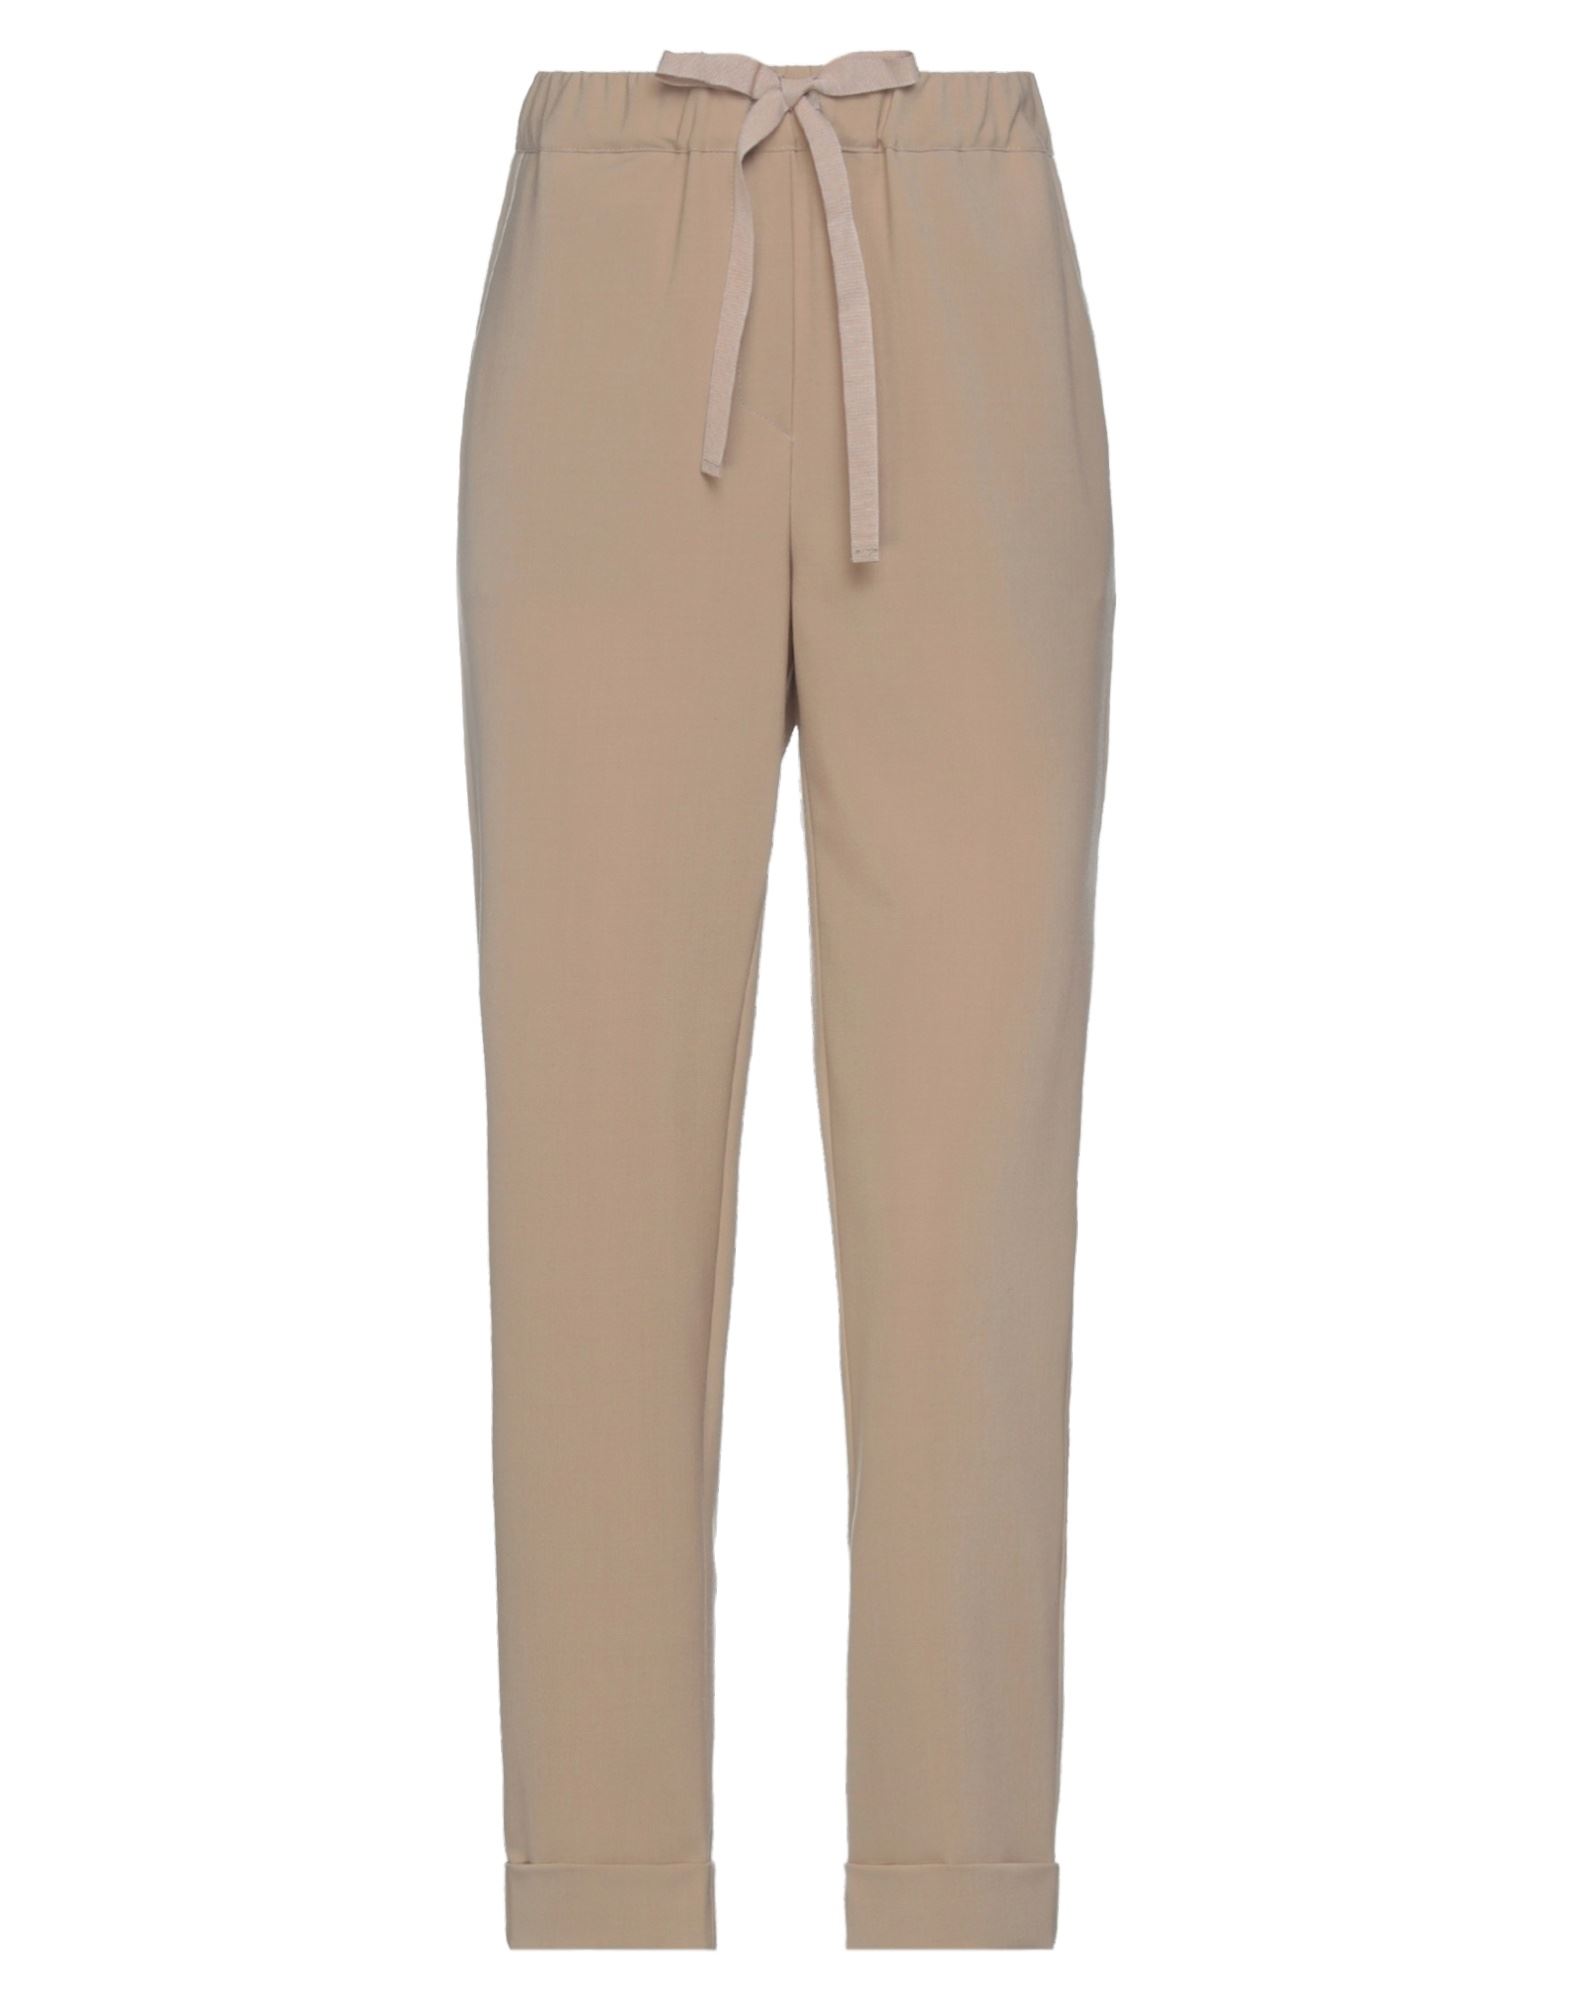 Semicouture Pants In Sand